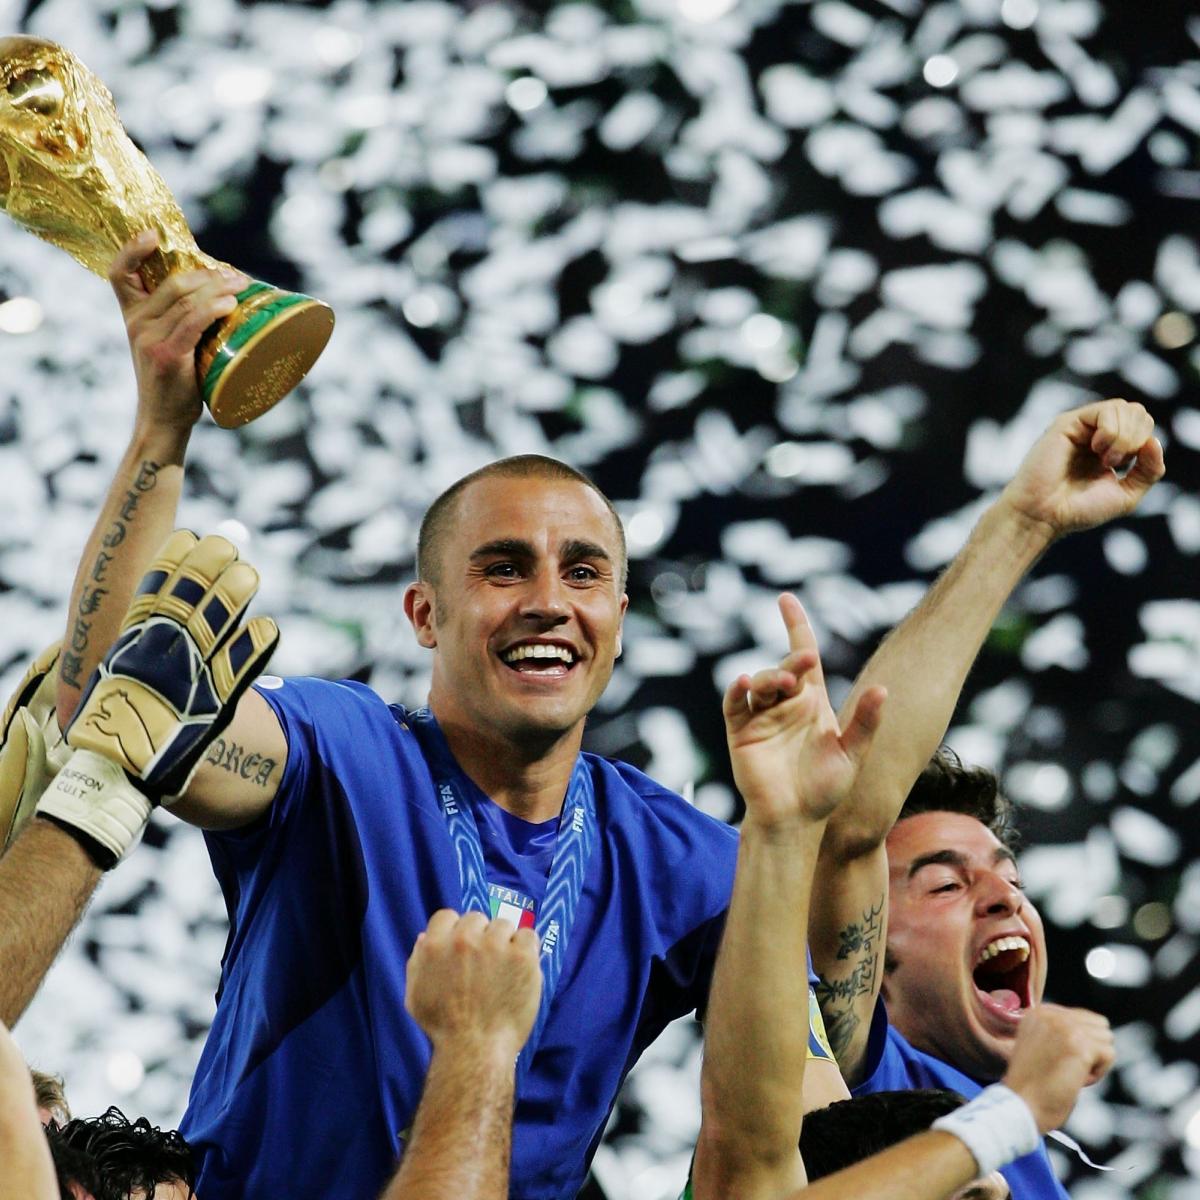 Italy: The Journey to Their 2006 World Cup Victory, News, Scores,  Highlights, Stats, and Rumors